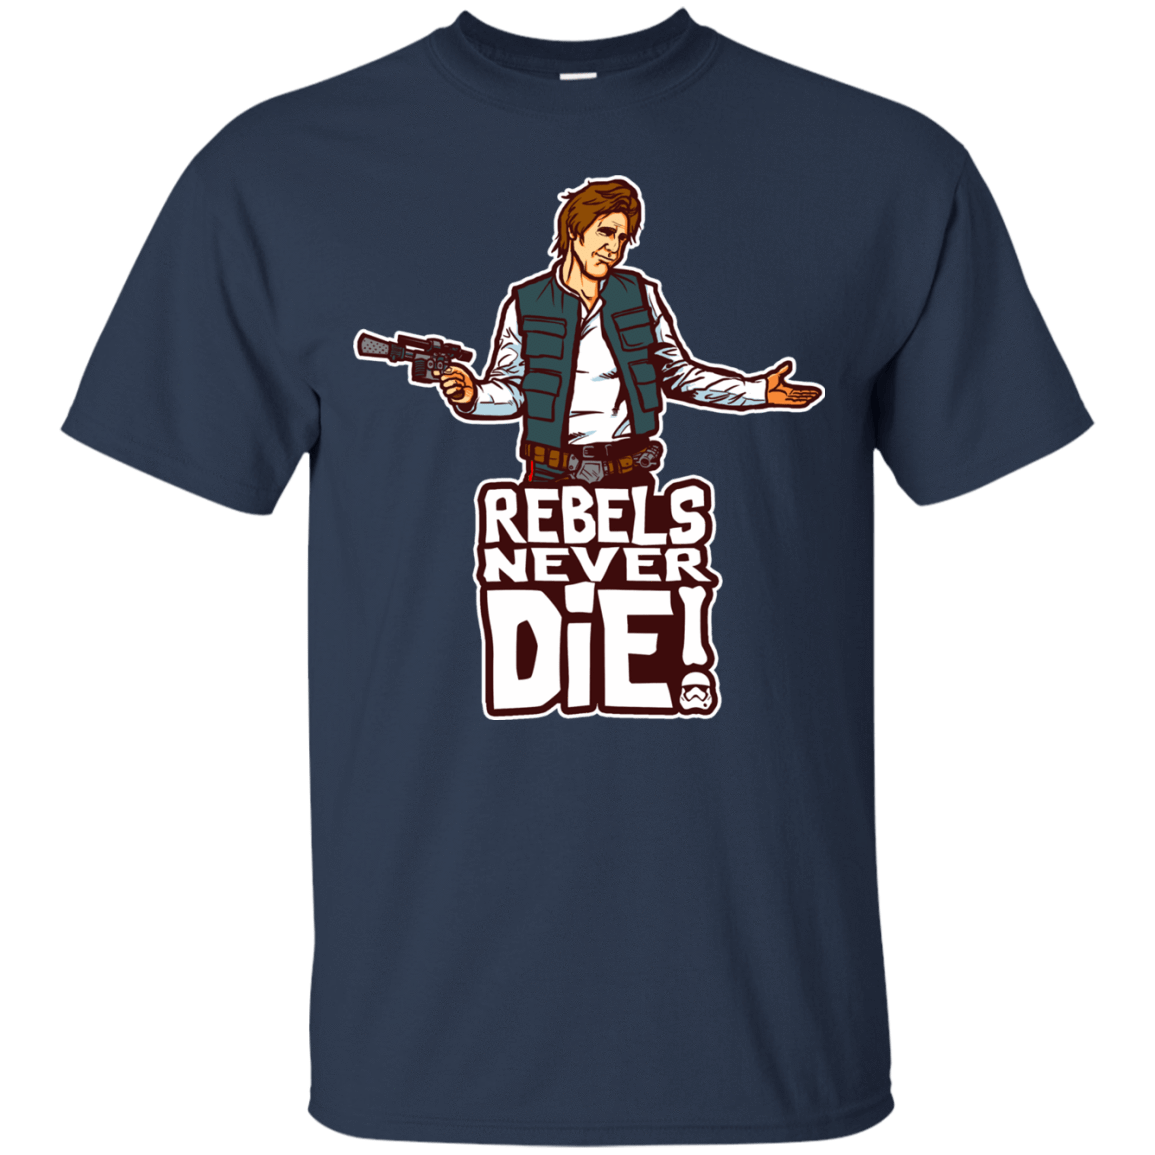 T-Shirts Navy / S Rebels Never Die T-Shirt